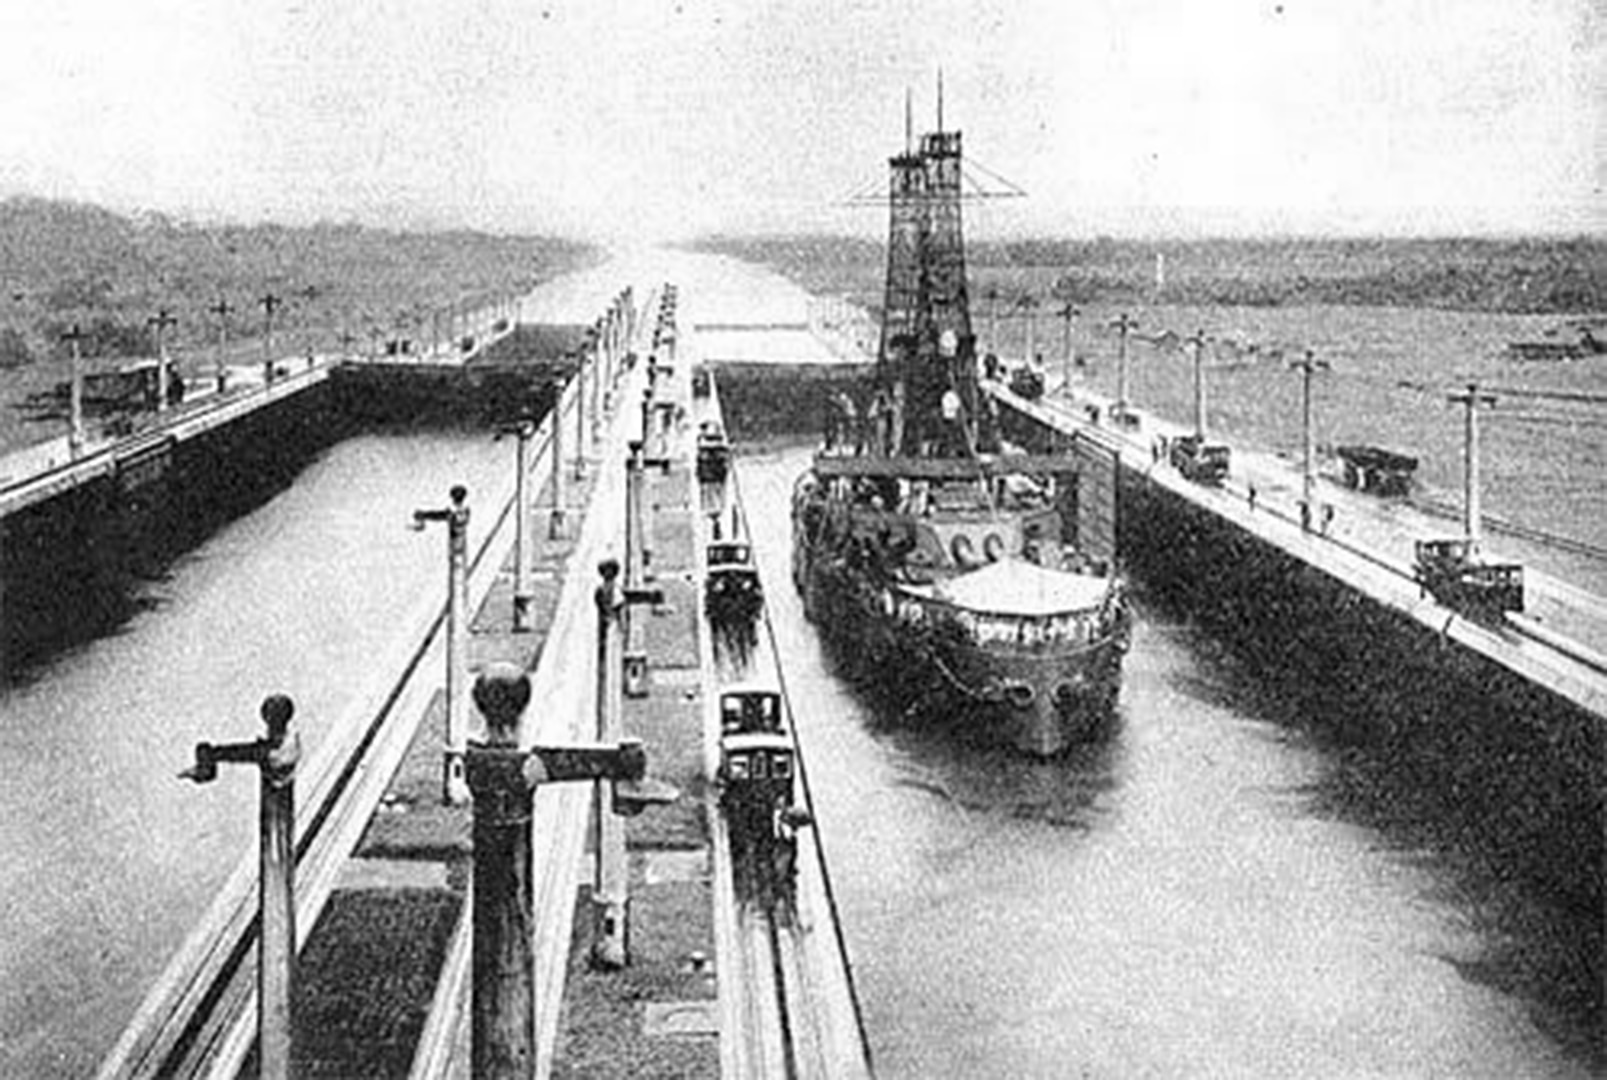 The USS Wisconsin proceeds through the Middle East Chamber Of Gatun Lock, Panama Canal, in July 1915. Electric locomotives haul the ships through the locks.